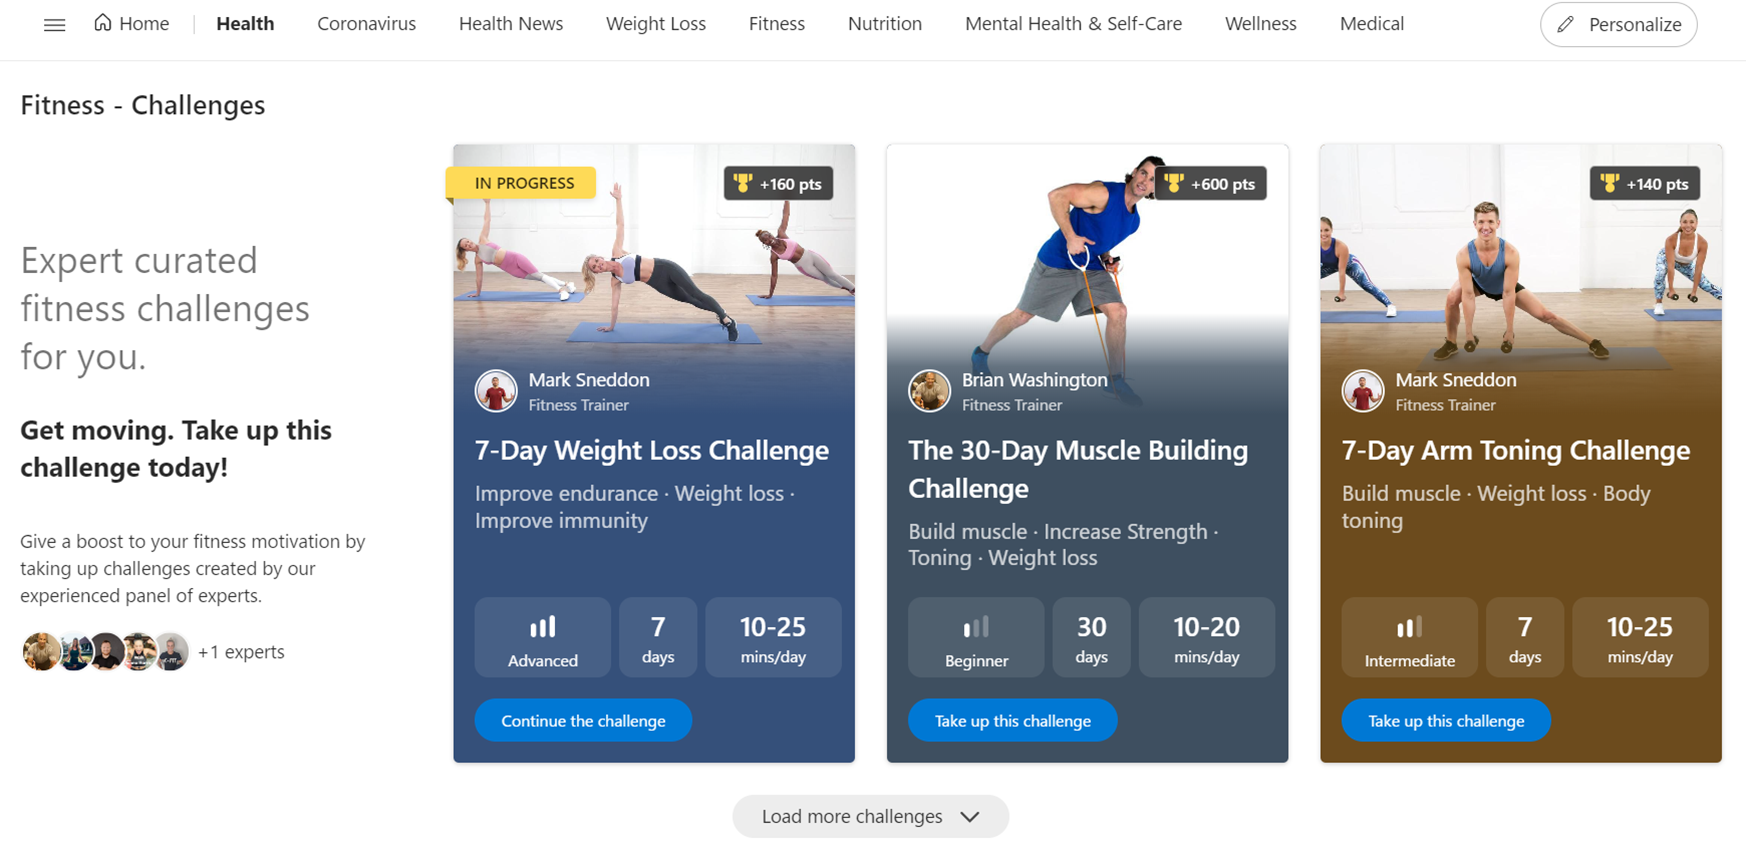 Thumbnail of Fitness Challenge Choices